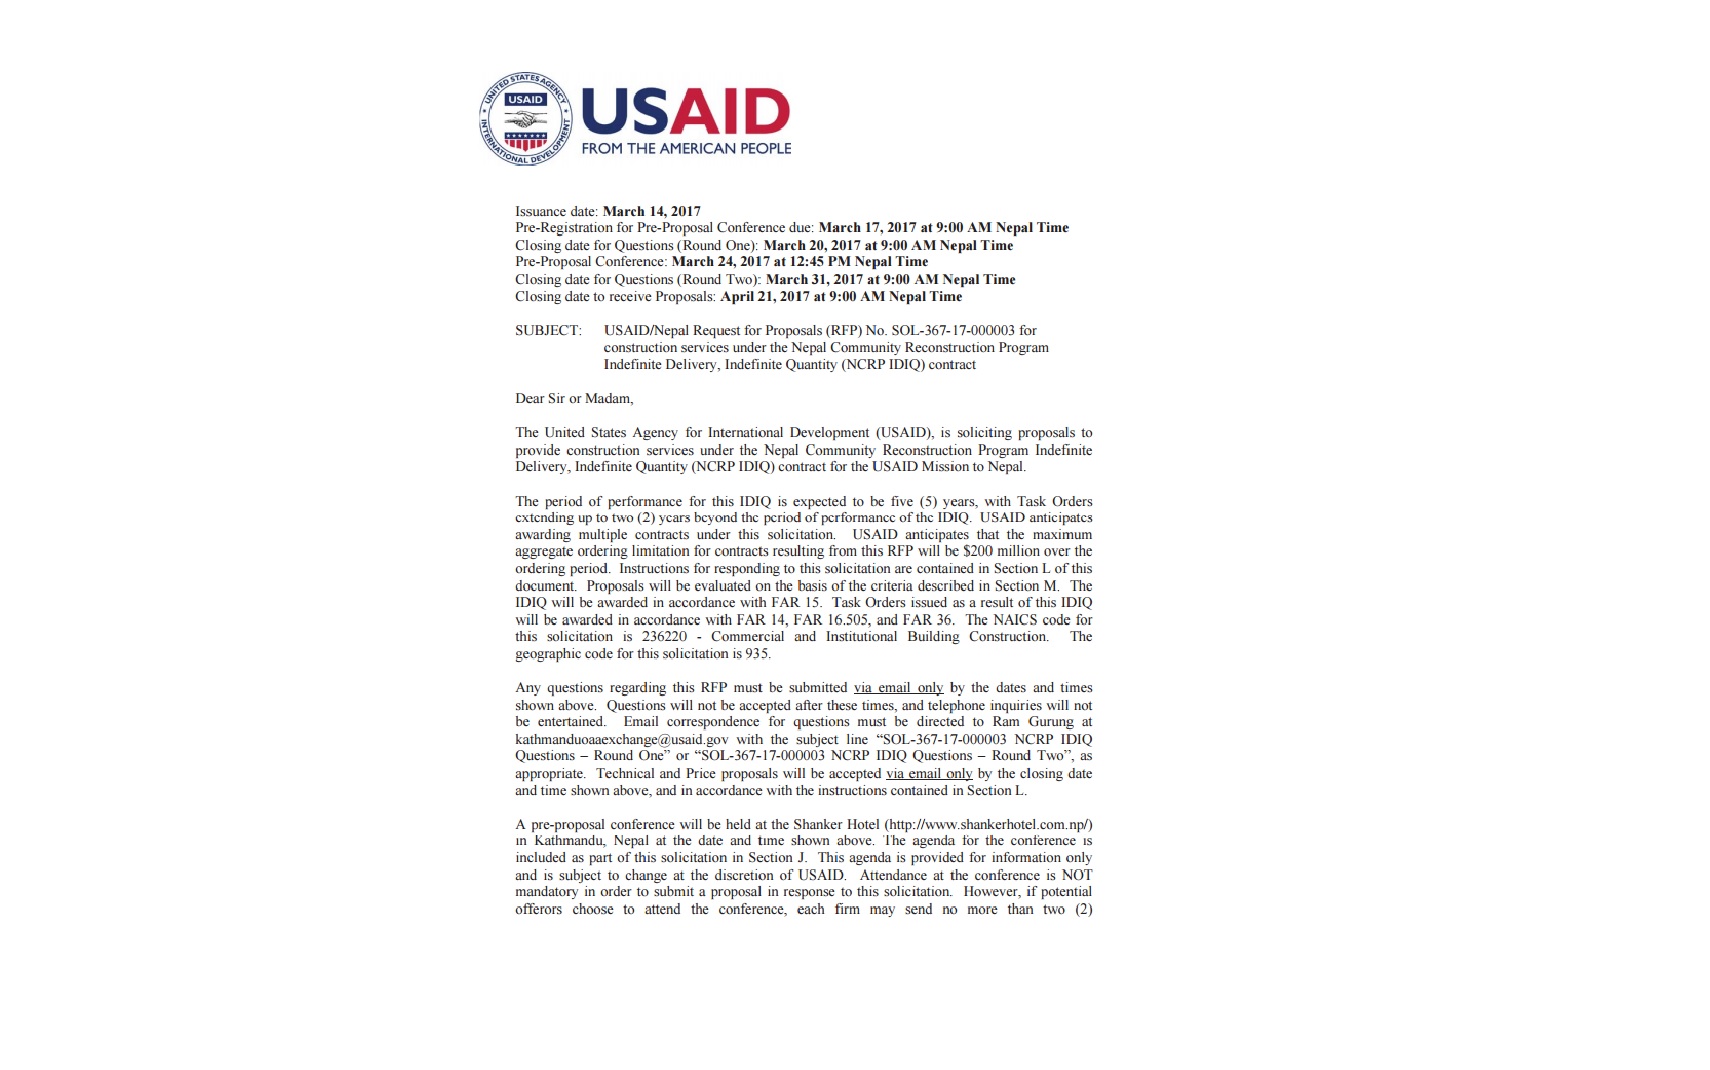 USAID/Nepal Request for Proposals (RFP) No. SOL-367-17-000003 for construction services under the Nepal Community Reconstruction Program Indefinite Delivery, Indefinite Quantity (NCRP IDIQ) contract